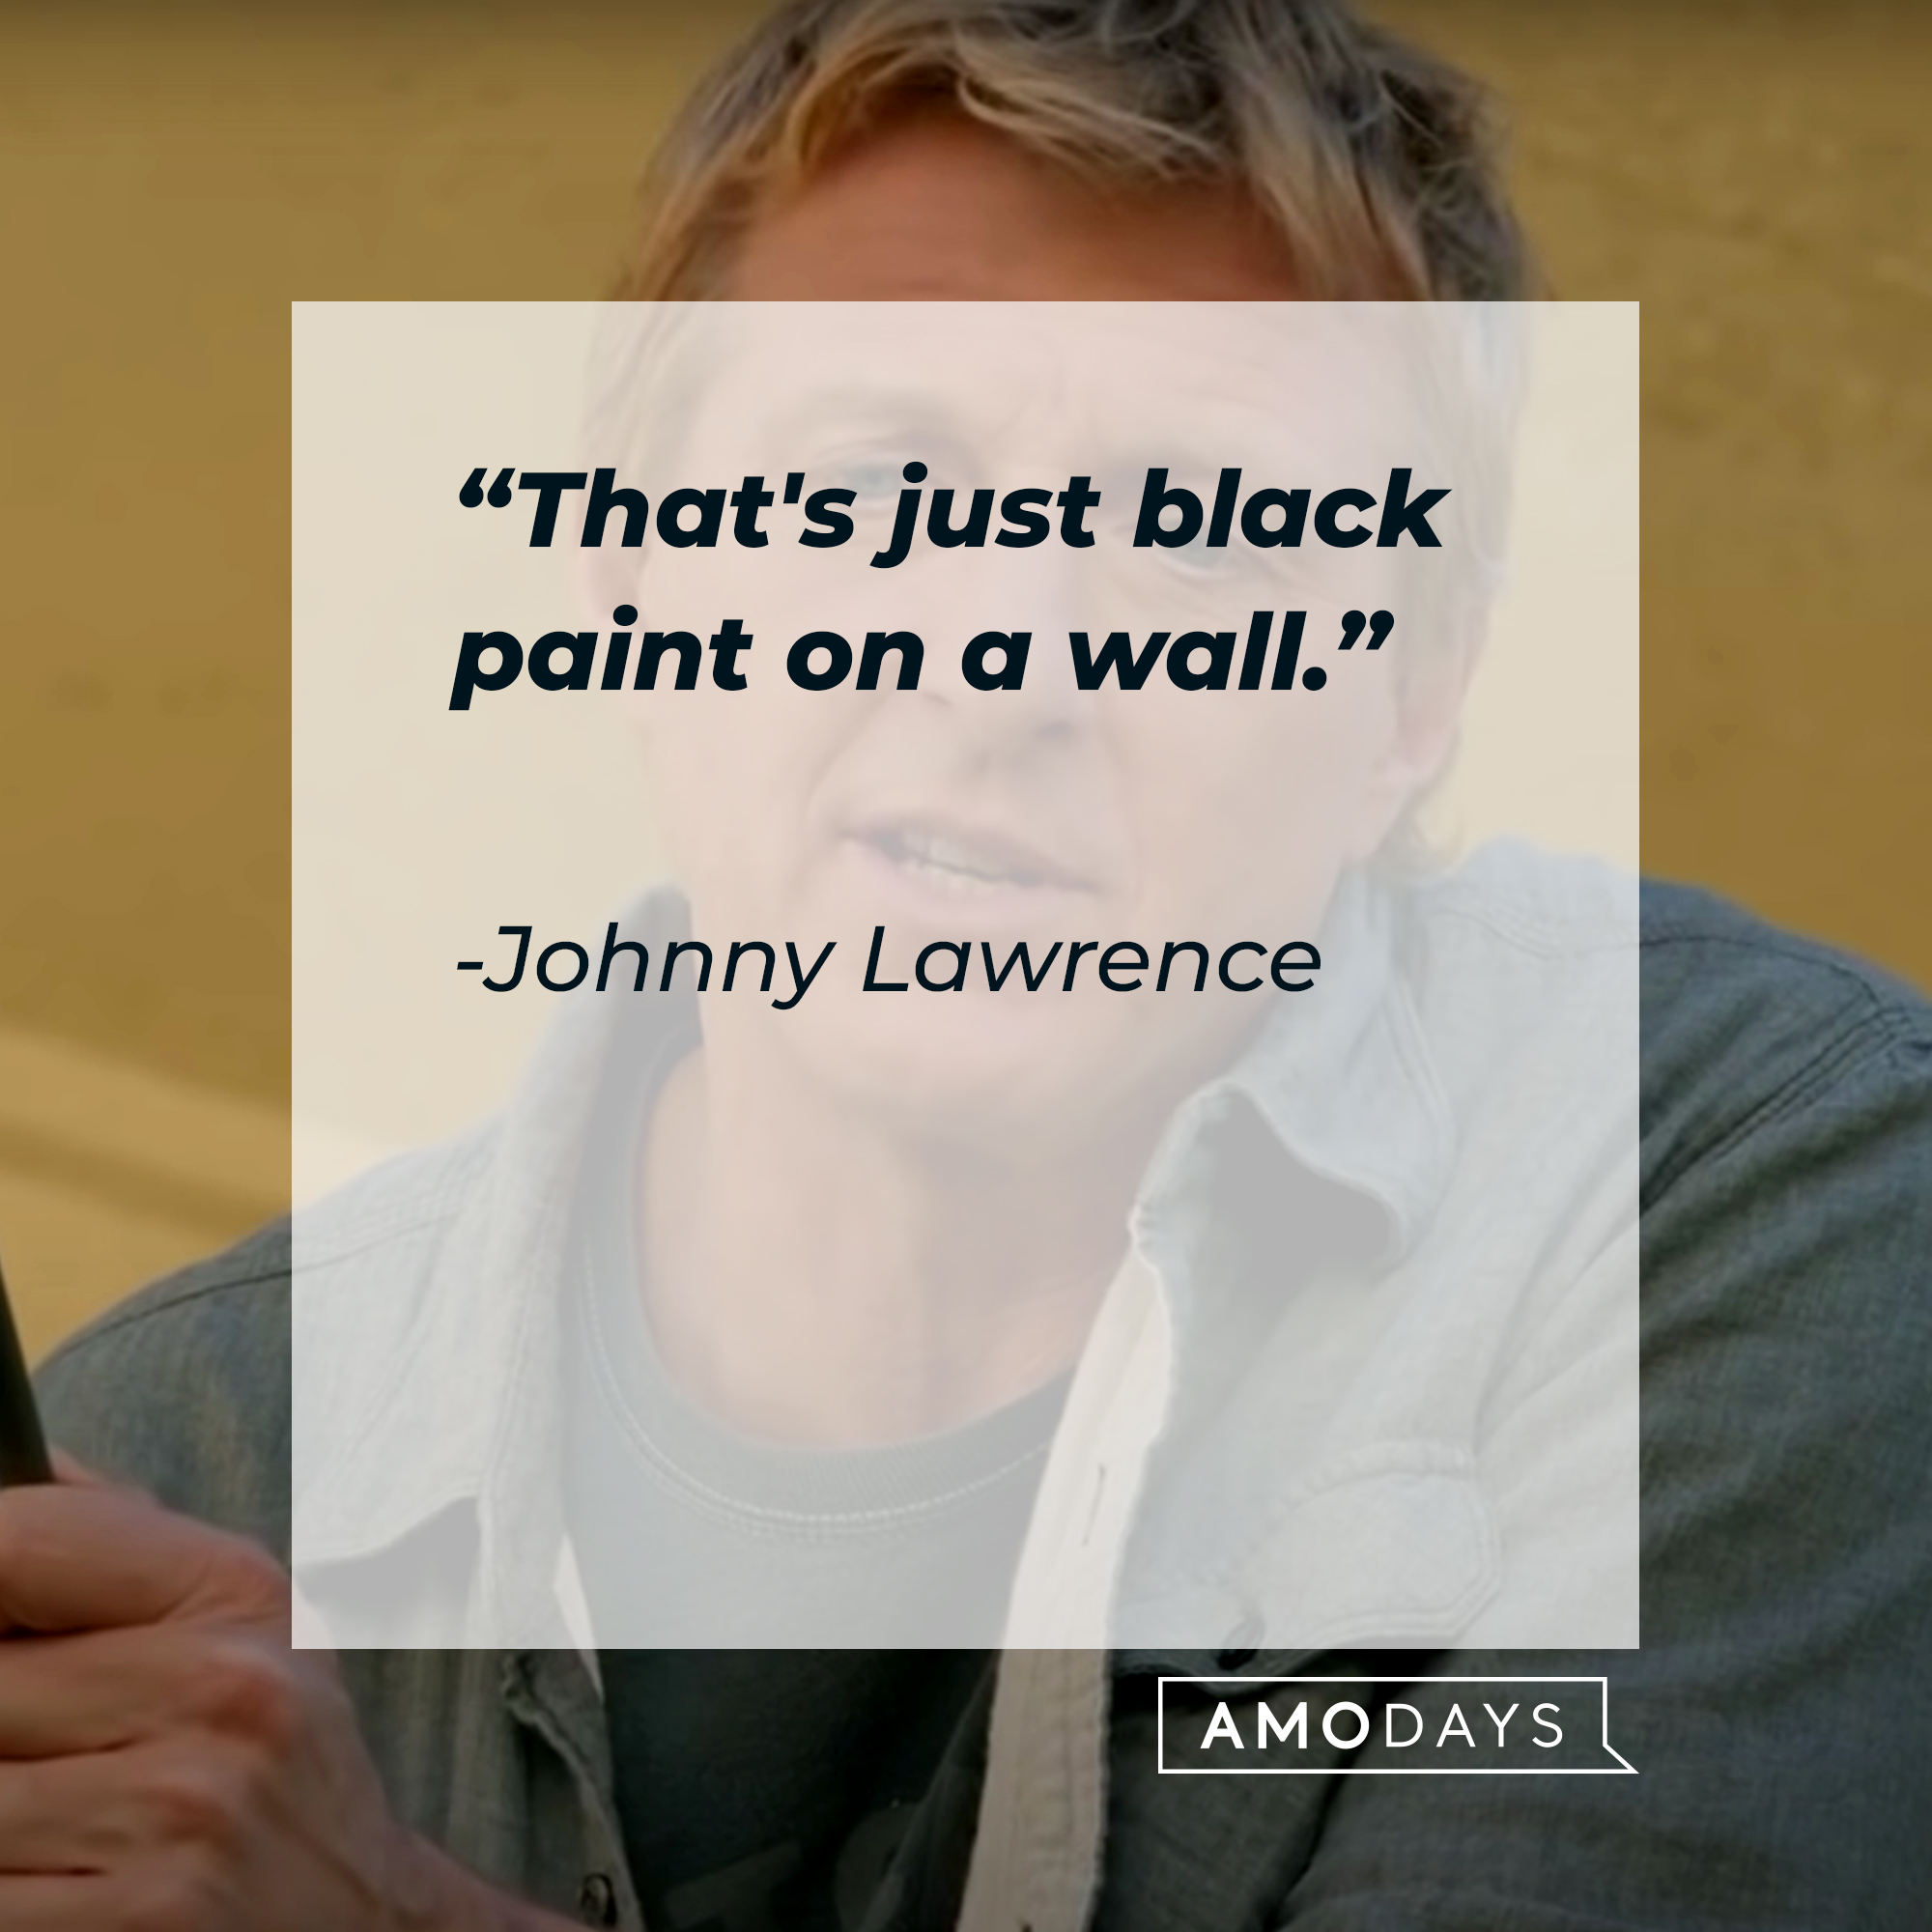 Johnny Lawrence, with his quote: "That's just black paint on a wall." | Source: facebook.com/CobraKaiSeries